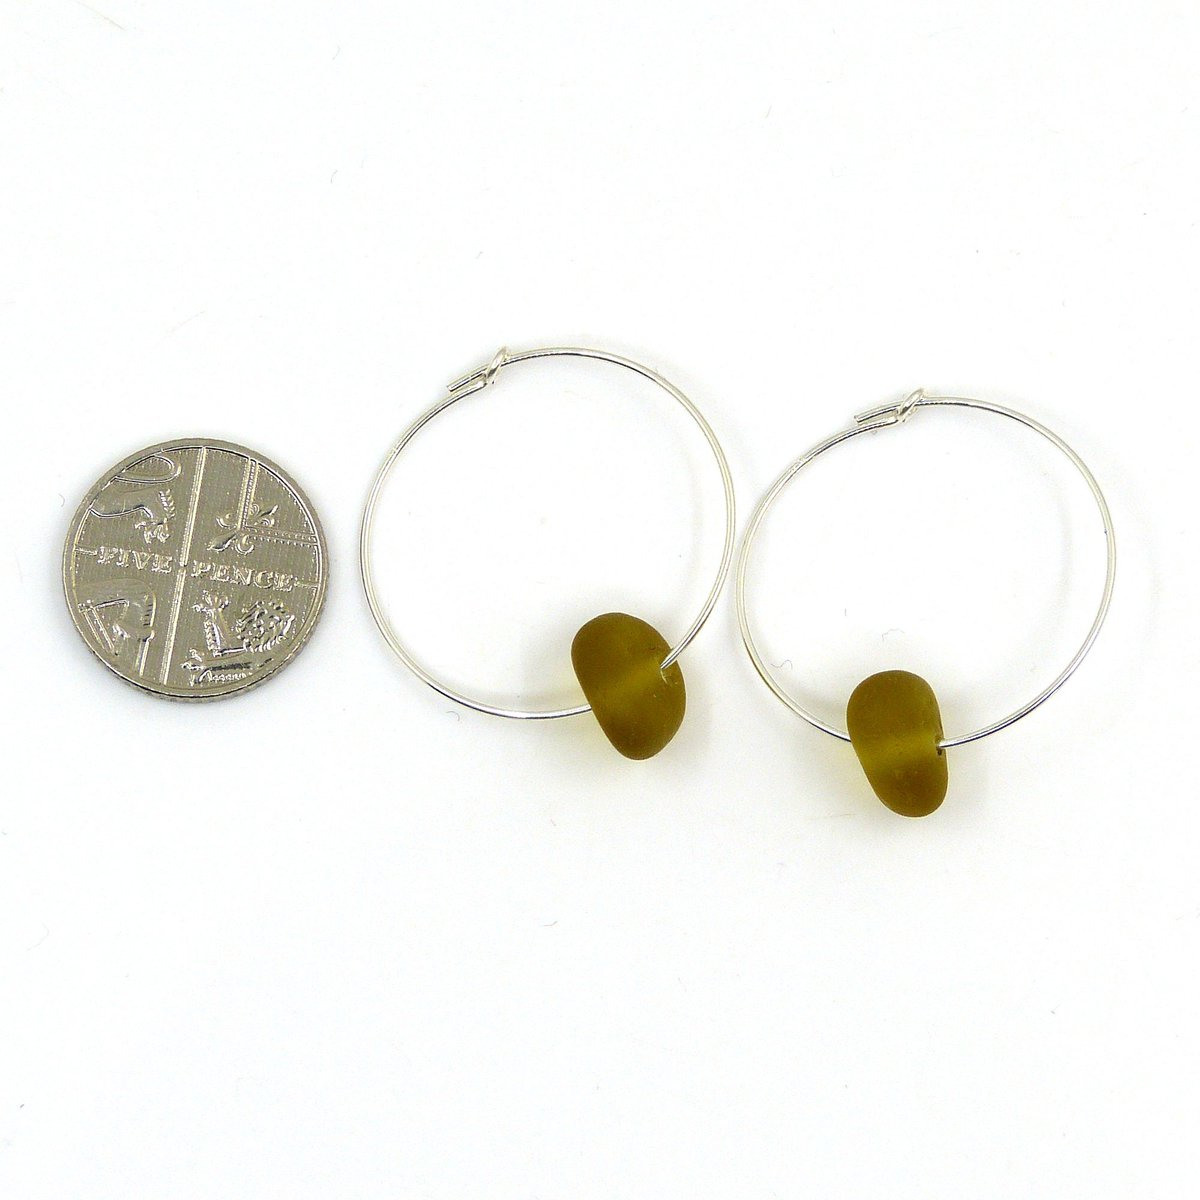 Deep Citron Sea Glass and Sterling Silver Hoop Earrings, Multiple Size Hoops, Order before 1pm Weekdays for same day dispatch tuppu.net/8e16f976 #HandmadeHour #shopindie #warkworth #Etsy #UKGiftHour #EarlyBiz #SeaGlassHoops